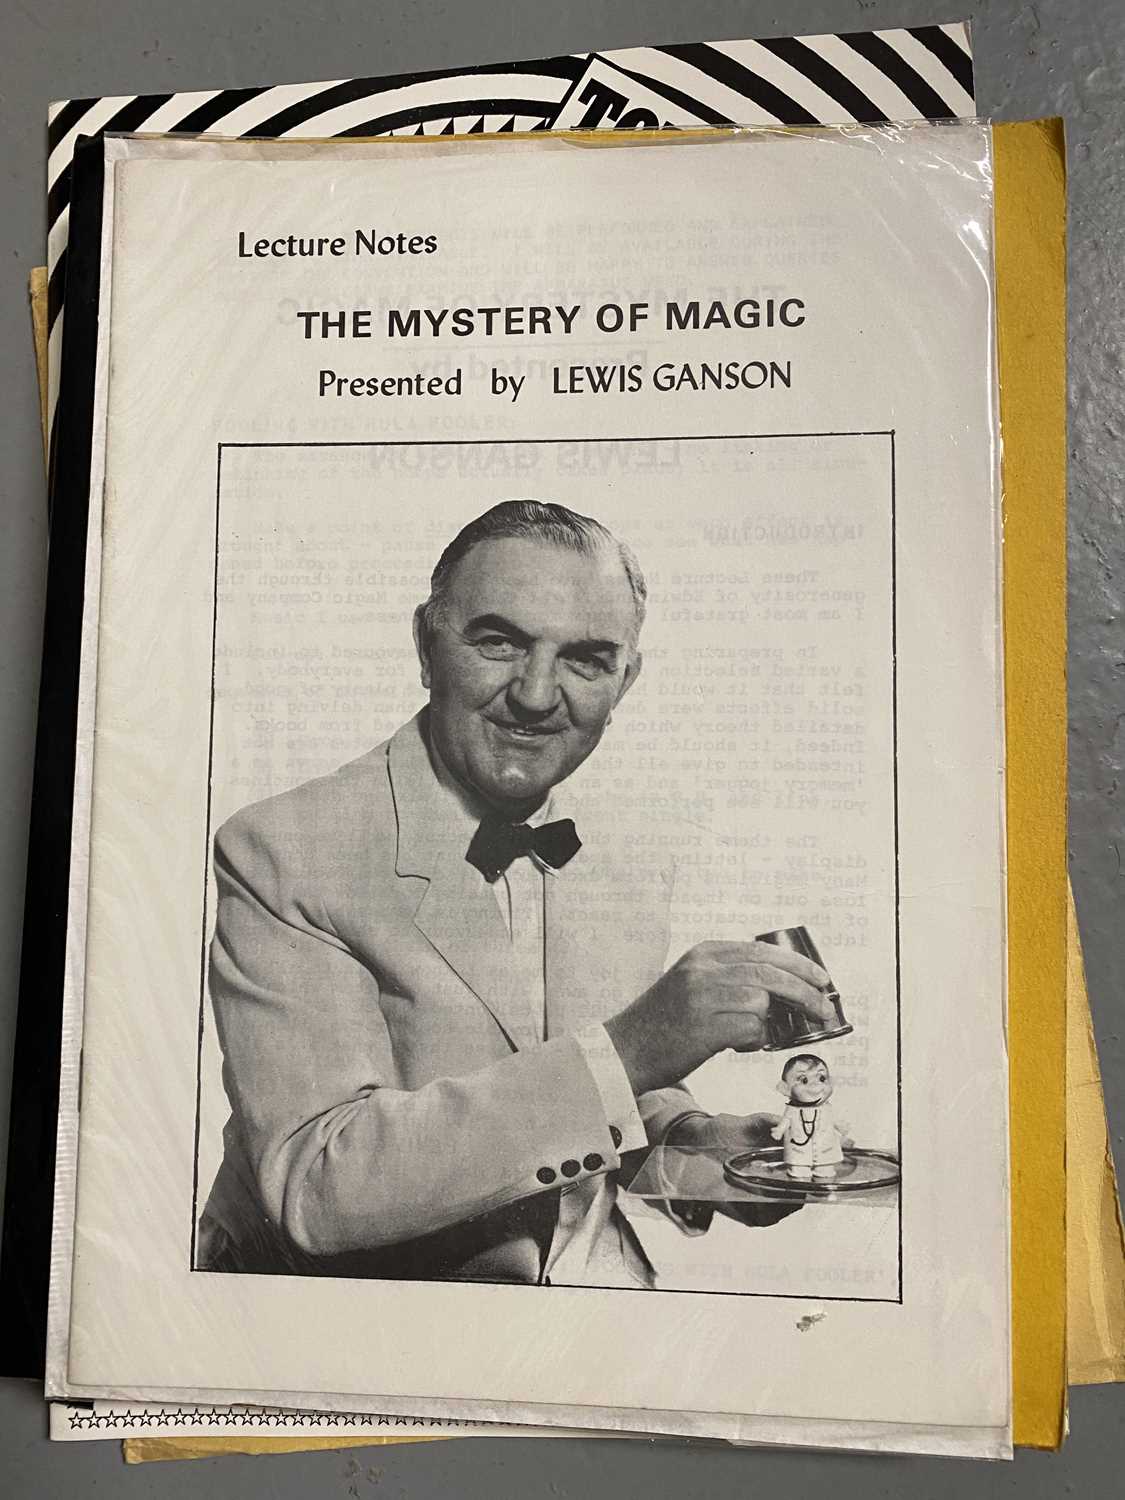 Potter's The Master Index to Magic in Print, and other ephemera relating to magic - Image 8 of 13